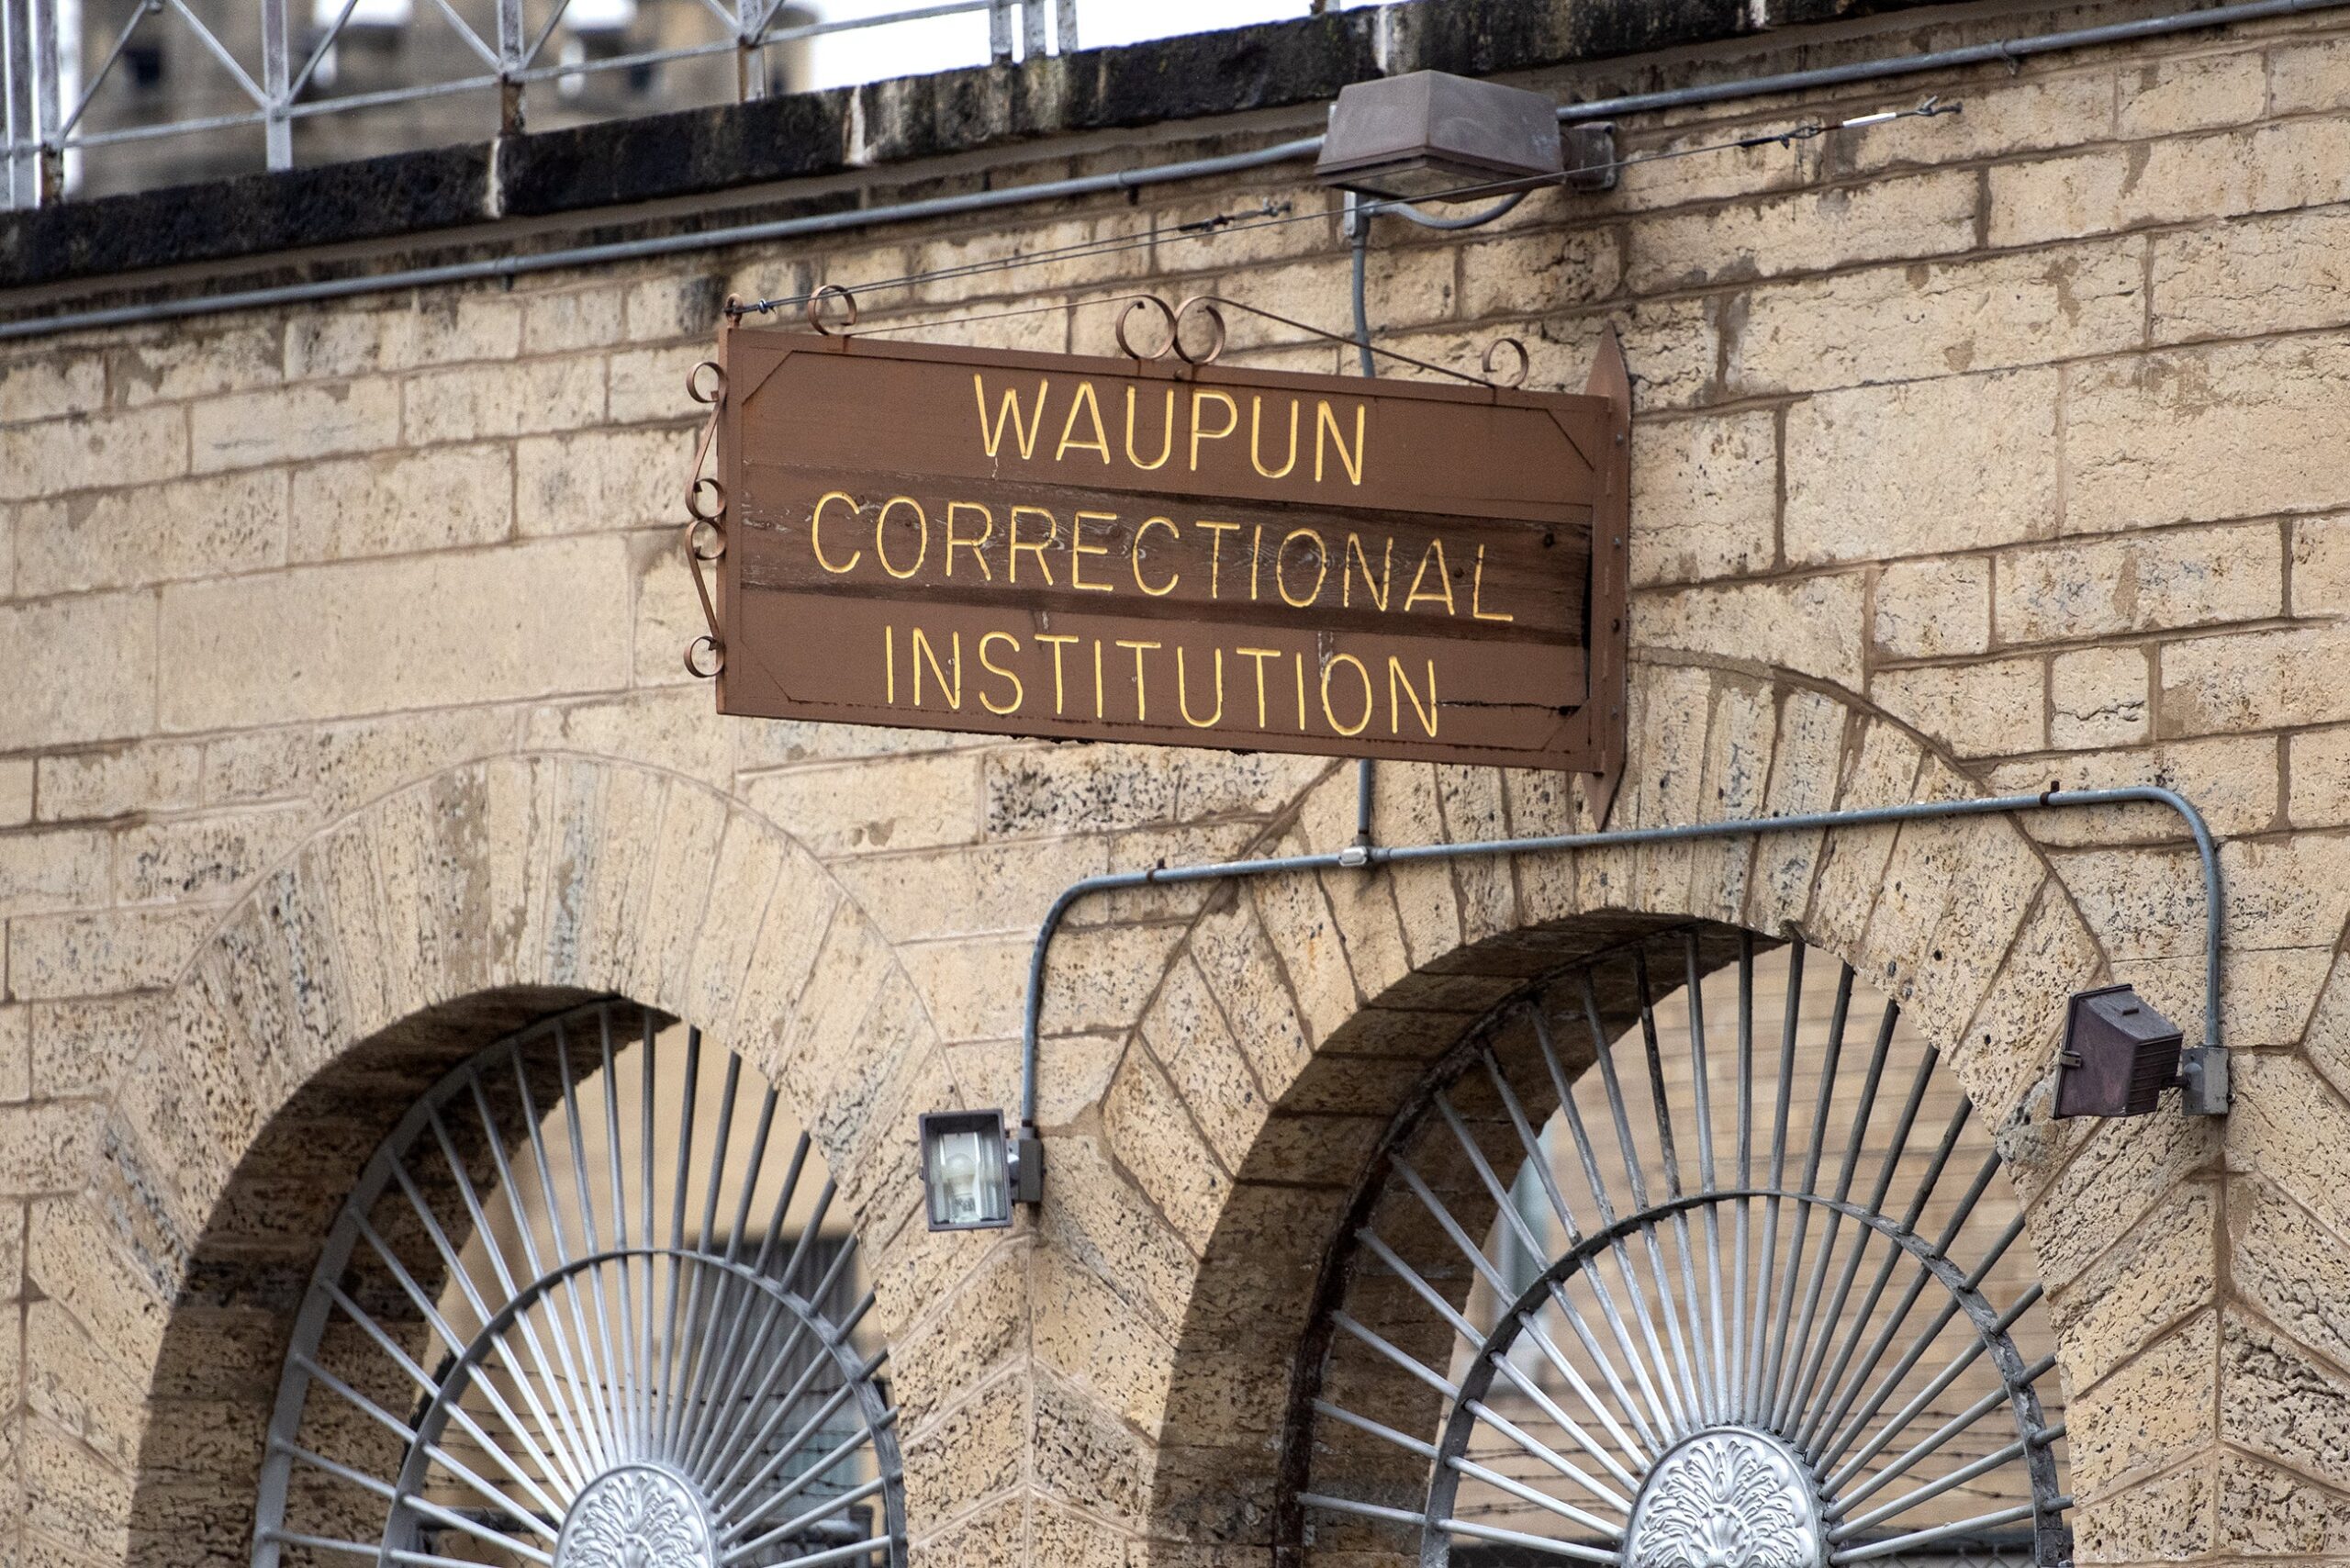 Wisconsin increases shower access at max security prison as lockdown stretches into 10th month